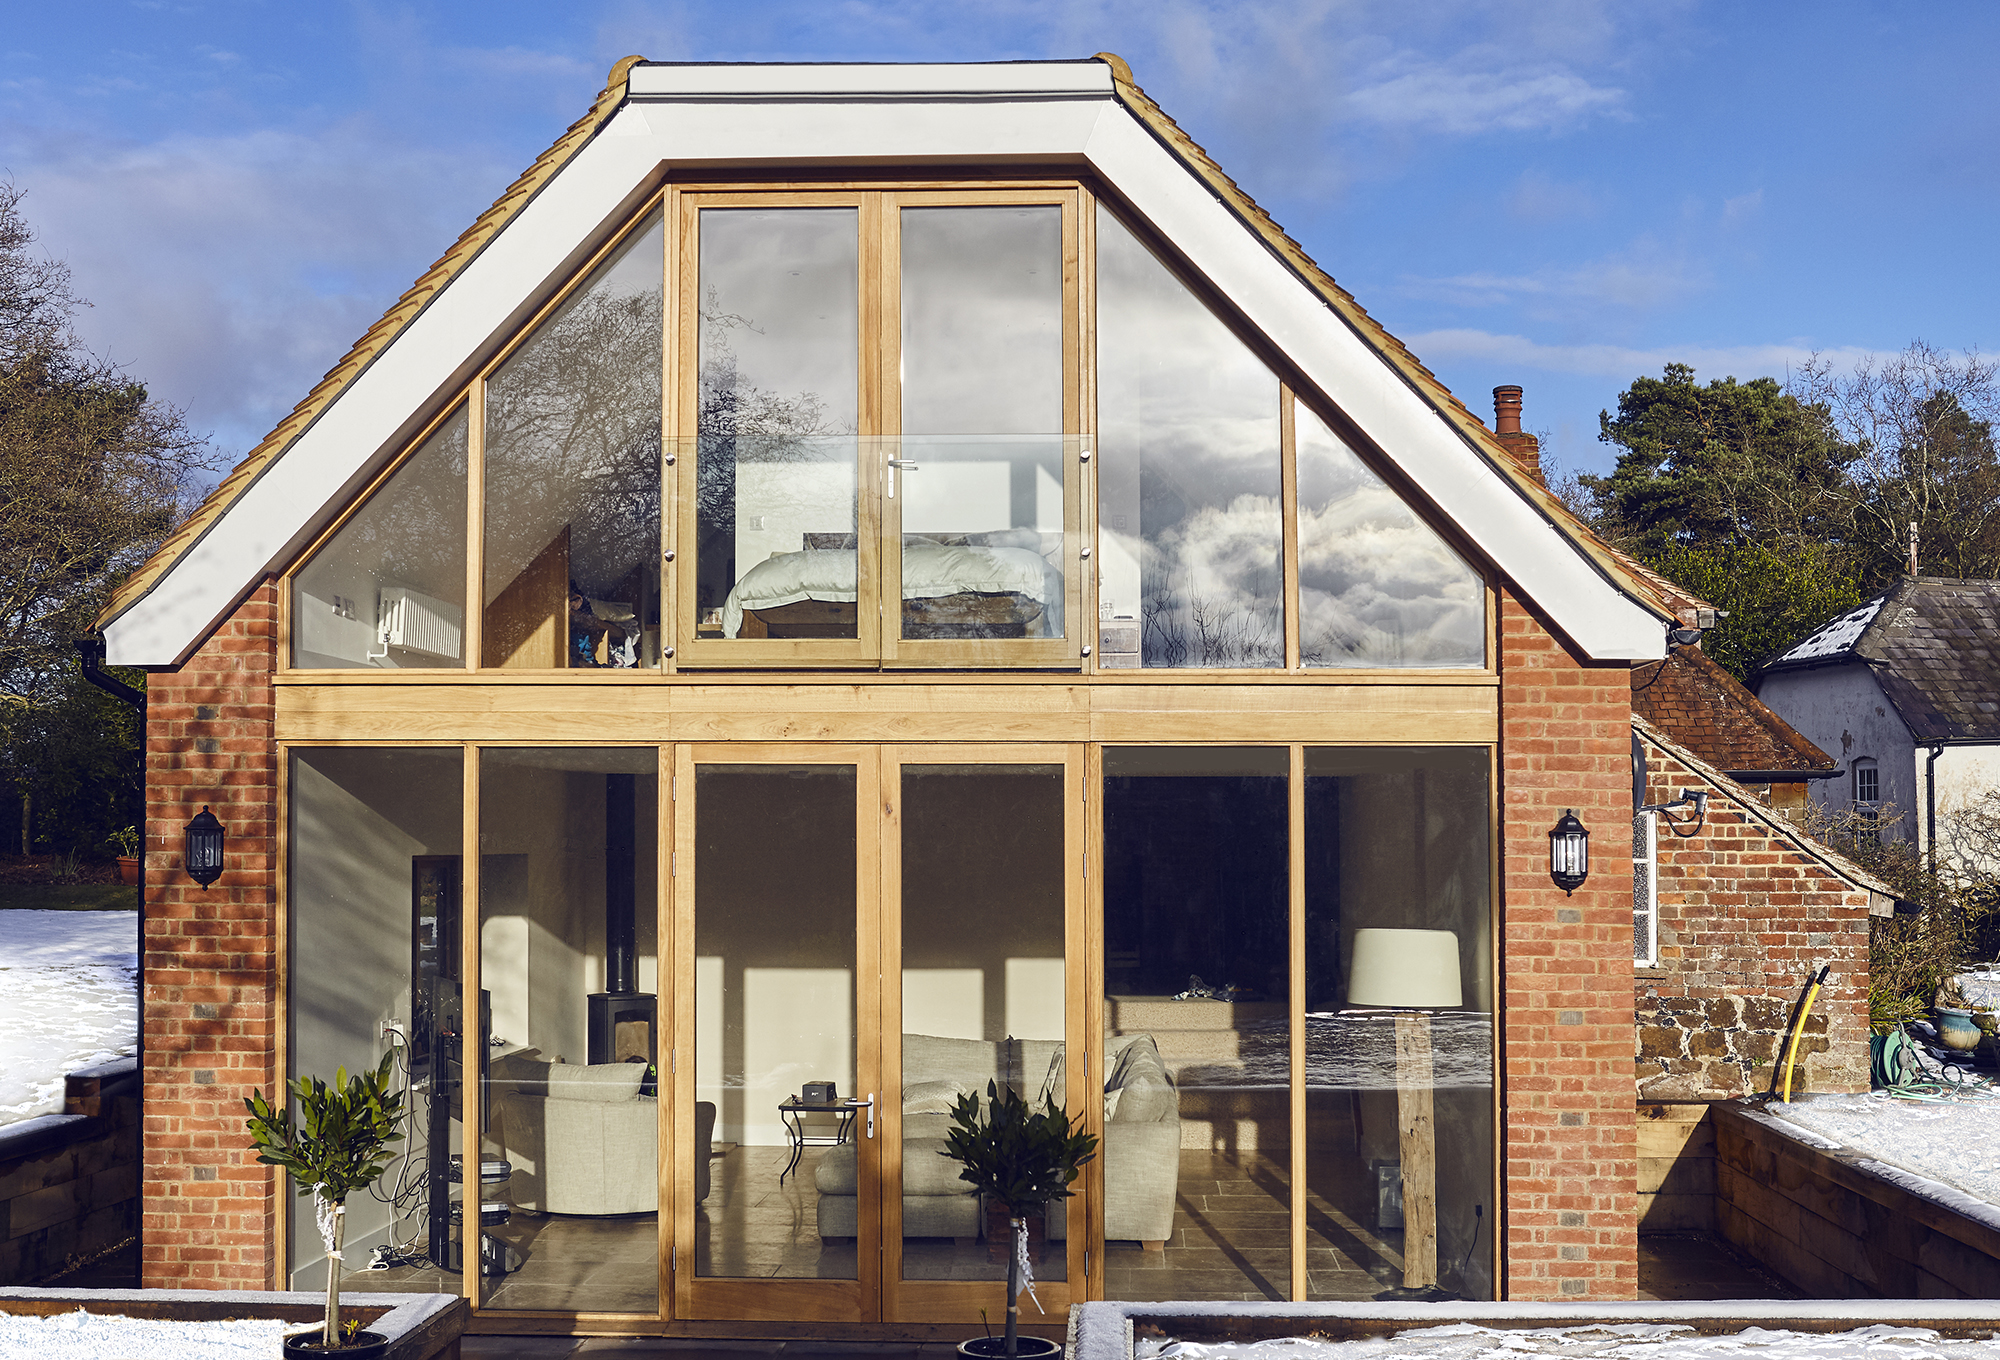 </p> <p>Find your ideal home design pro on designfor-me.com - get matched and see who's interested in your home project. Click image to see more inspiration from our design pros</p> <p>Design by James, architect from Bristol, City of, South West</p> <p>#architecture #homedesign #modernhomes #homeinspiration #extensions #extensiondesign #extensioninspiration #extensionideas #houseextension #glazing #architecturalglazing #naturallight </p> <p>